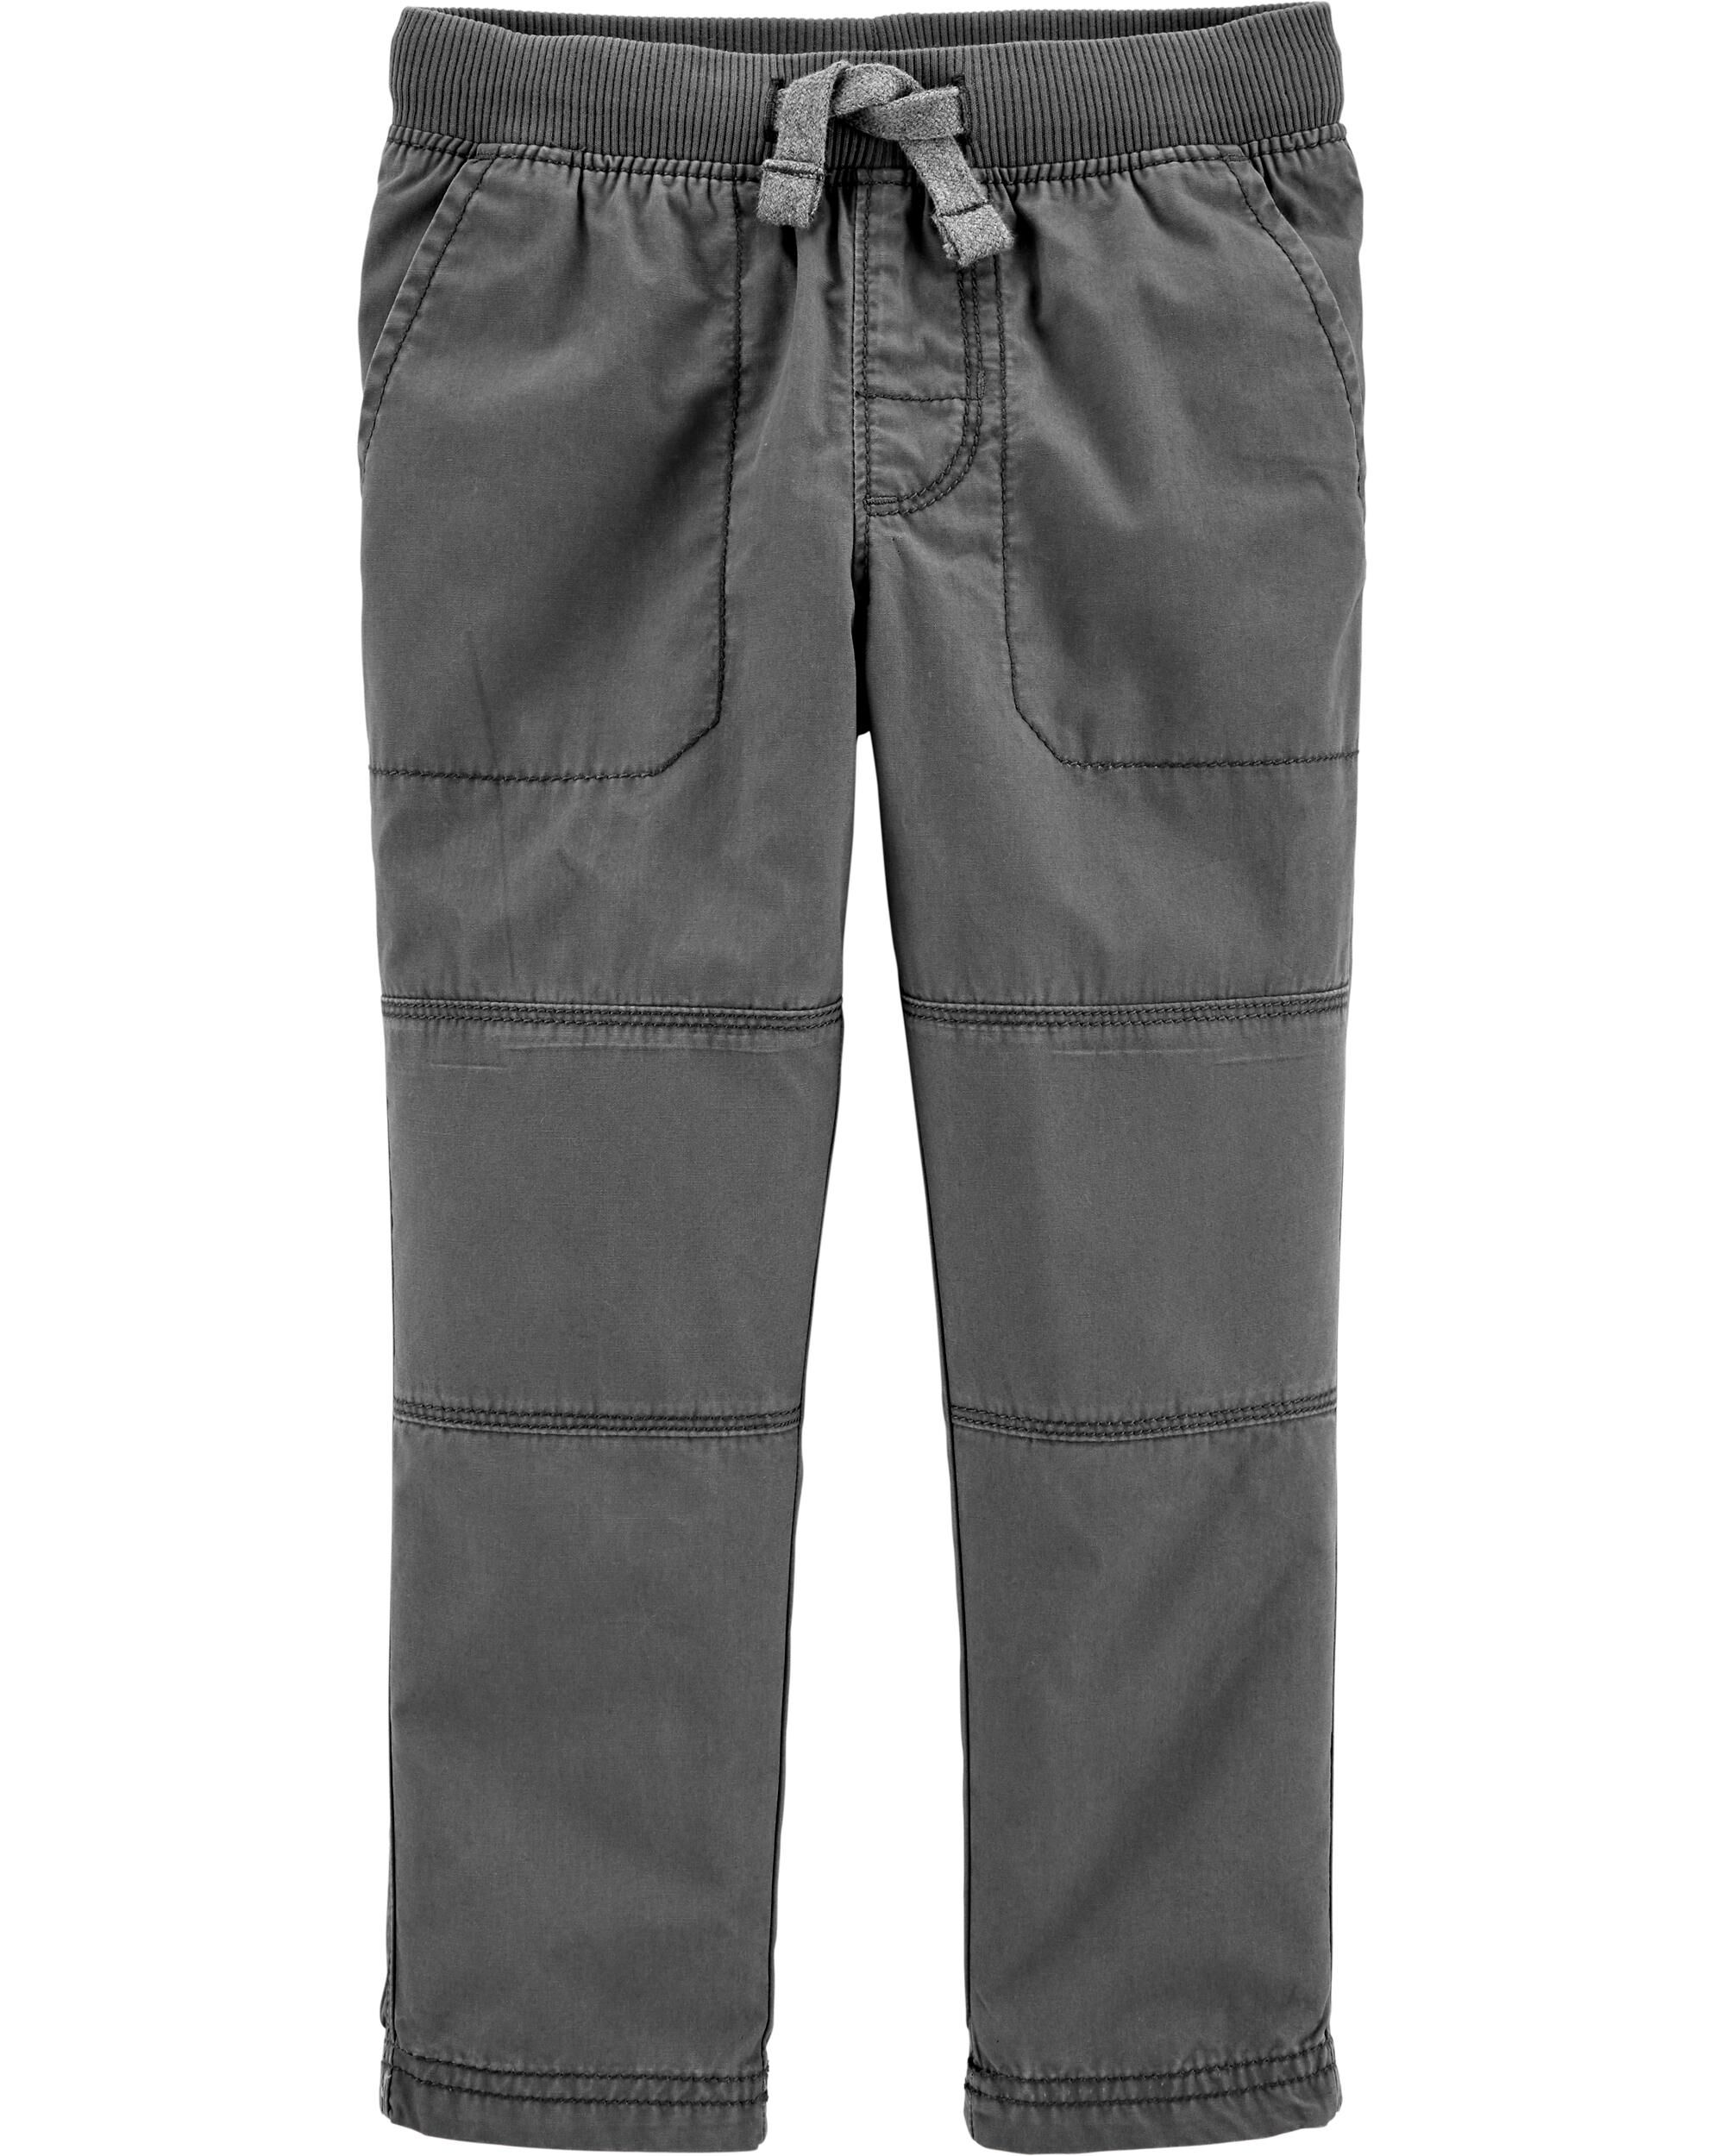 little boy jeans with reinforced knees